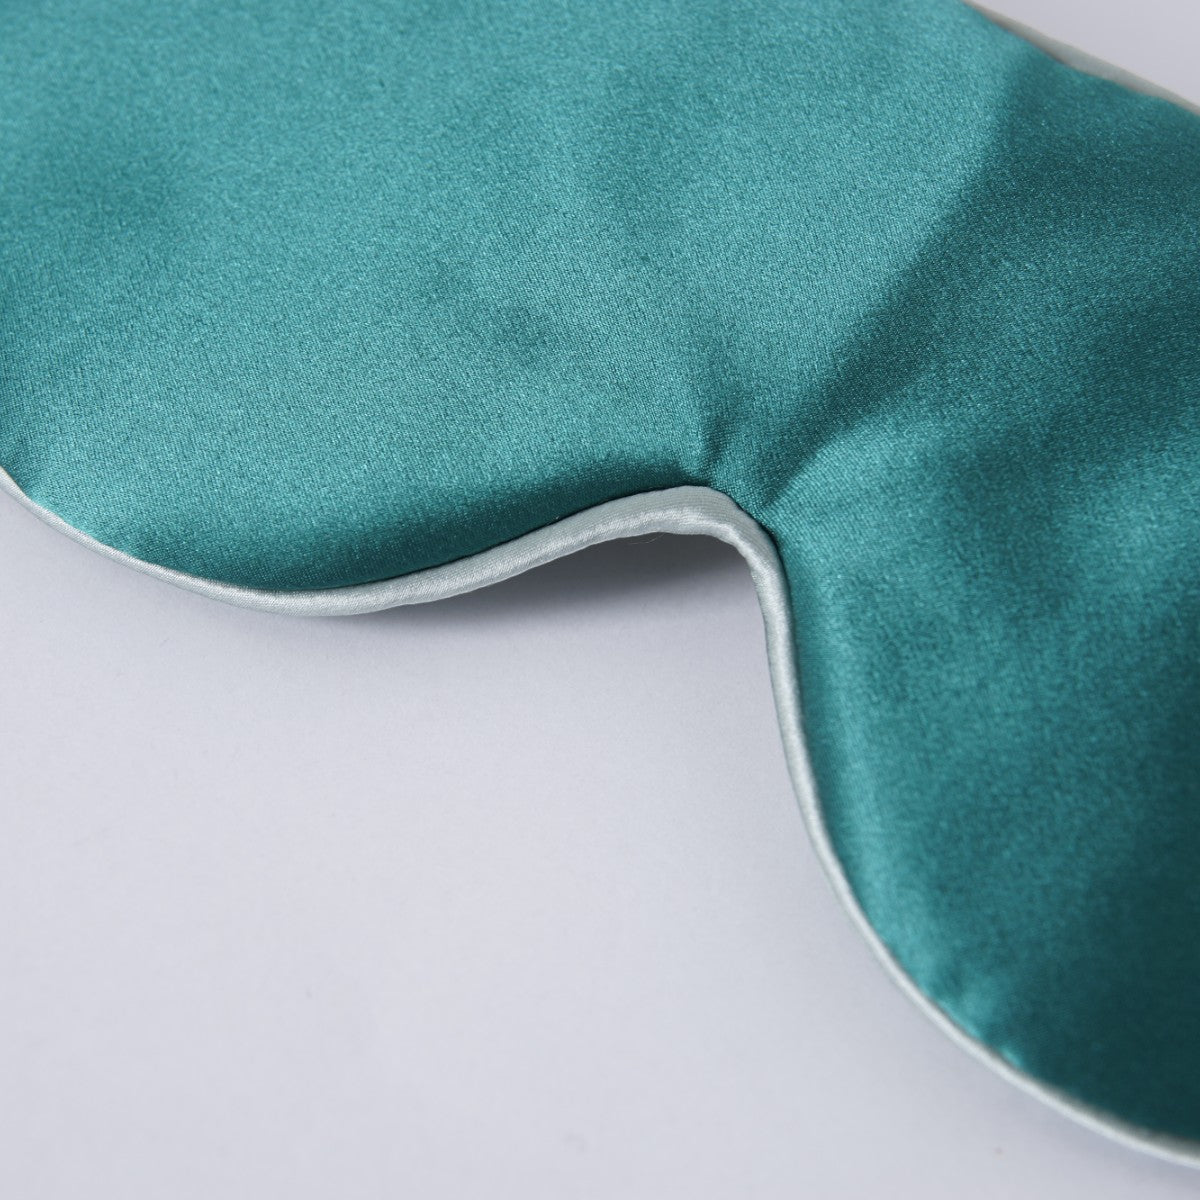 Contrast Colors Mulberry Silk Sleep Mask